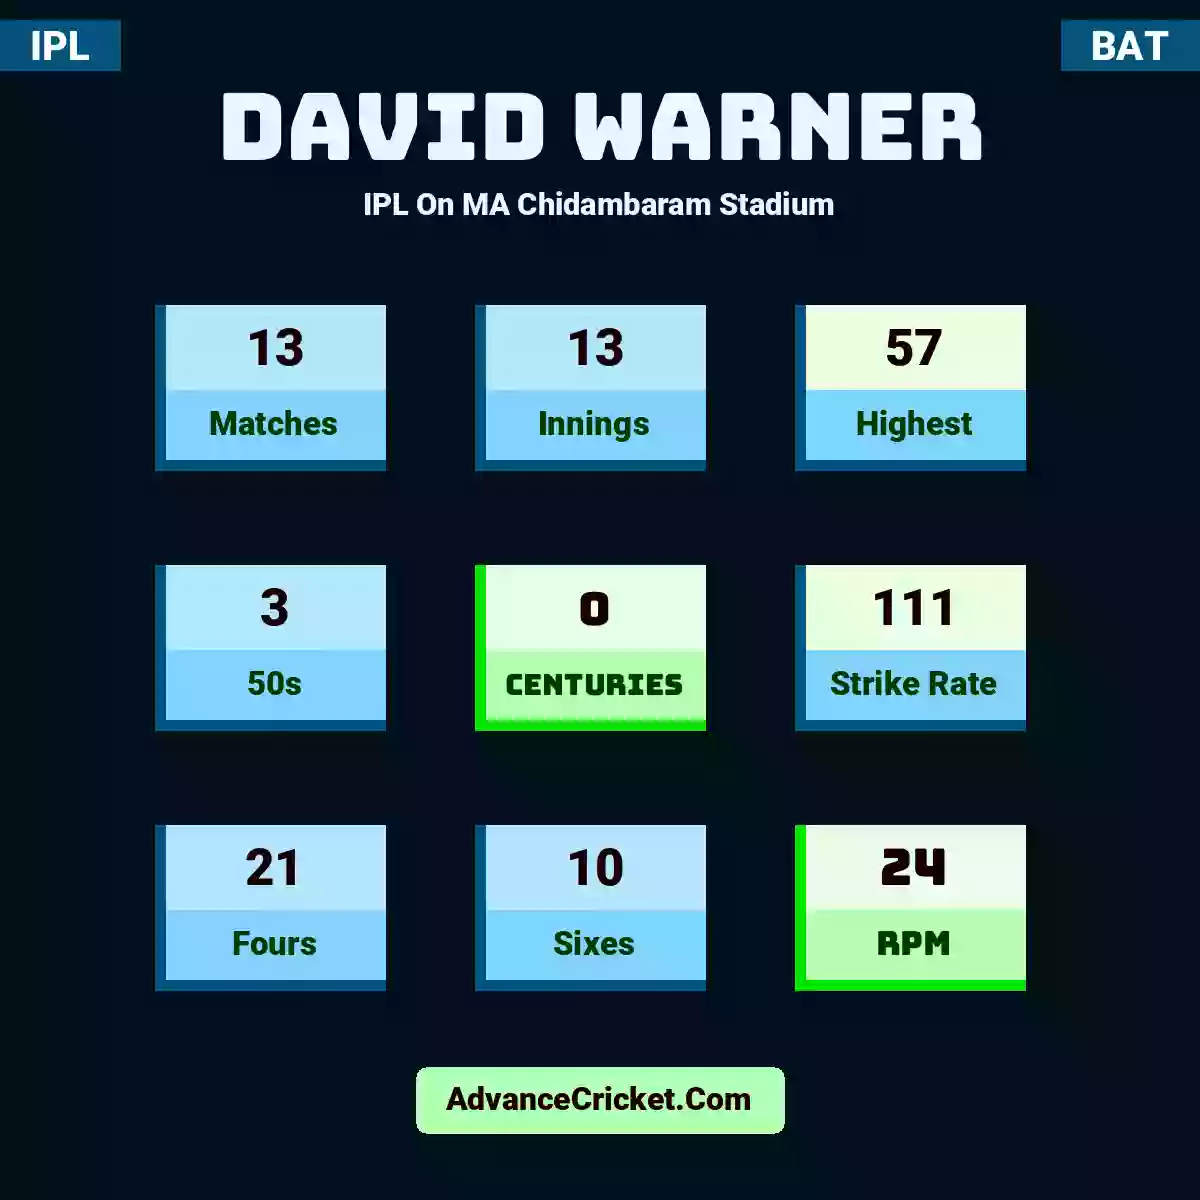 David Warner IPL  On MA Chidambaram Stadium, David Warner played 13 matches, scored 57 runs as highest, 3 half-centuries, and 0 centuries, with a strike rate of 111. D.Warner hit 21 fours and 10 sixes, with an RPM of 24.